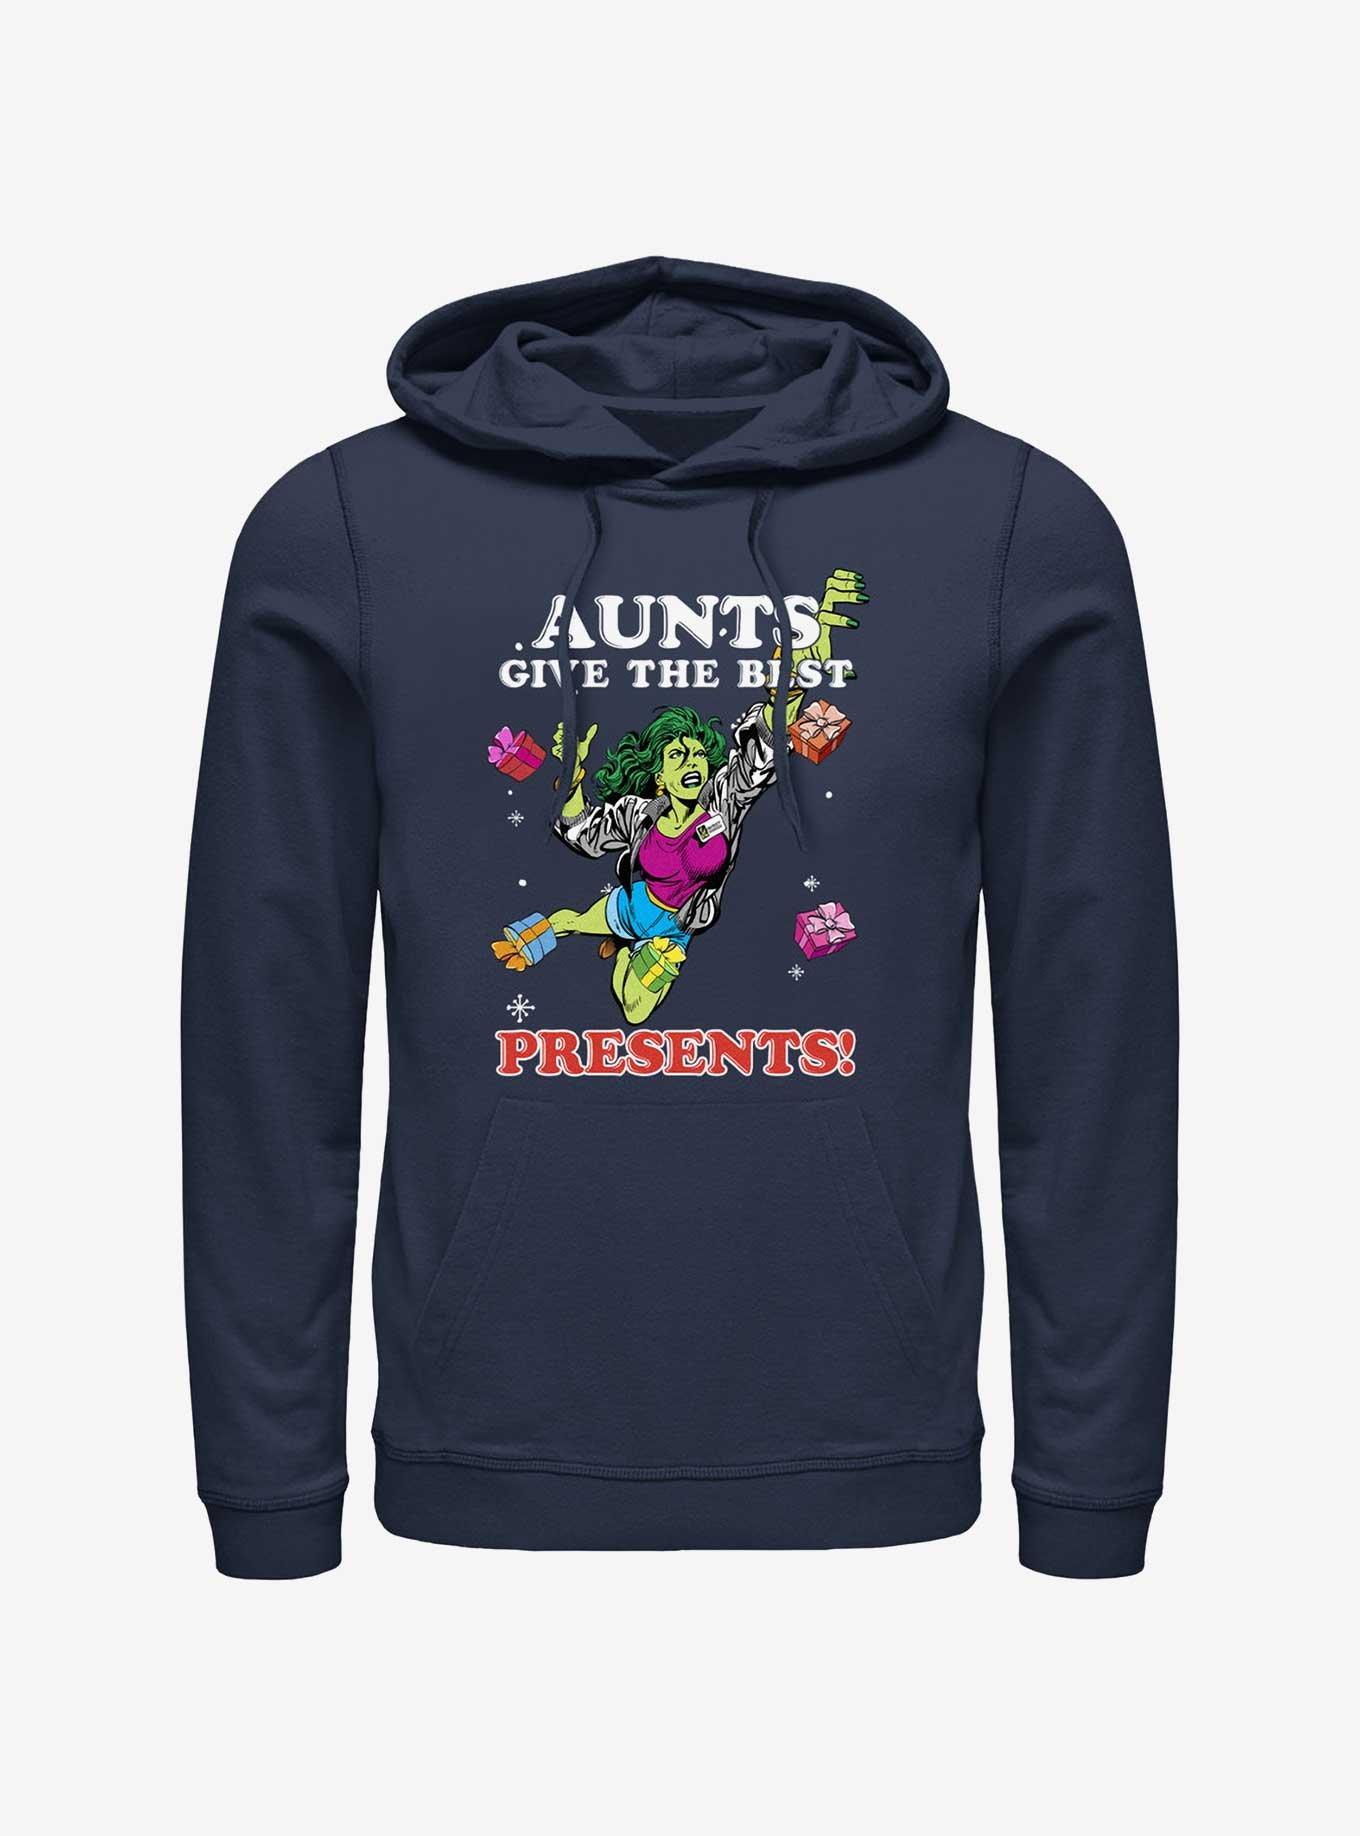 Marvel She-Hulk Aunts Give The Best Presents Hoodie